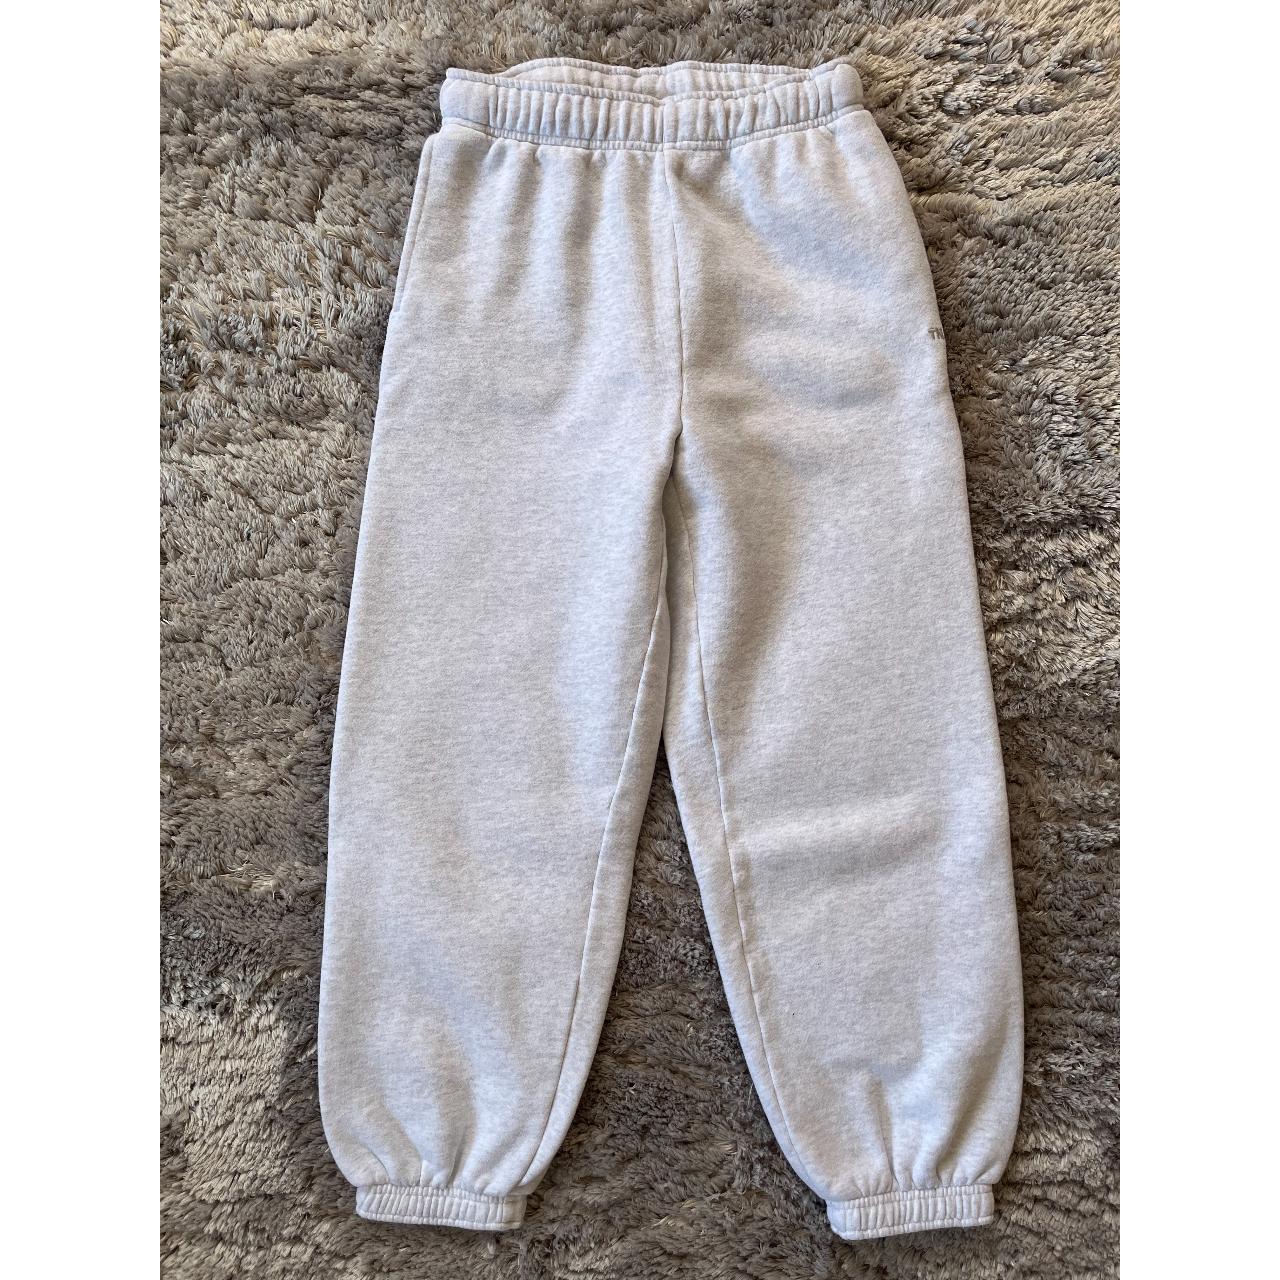 Aritzia Women's White and Grey Joggers-tracksuits | Depop